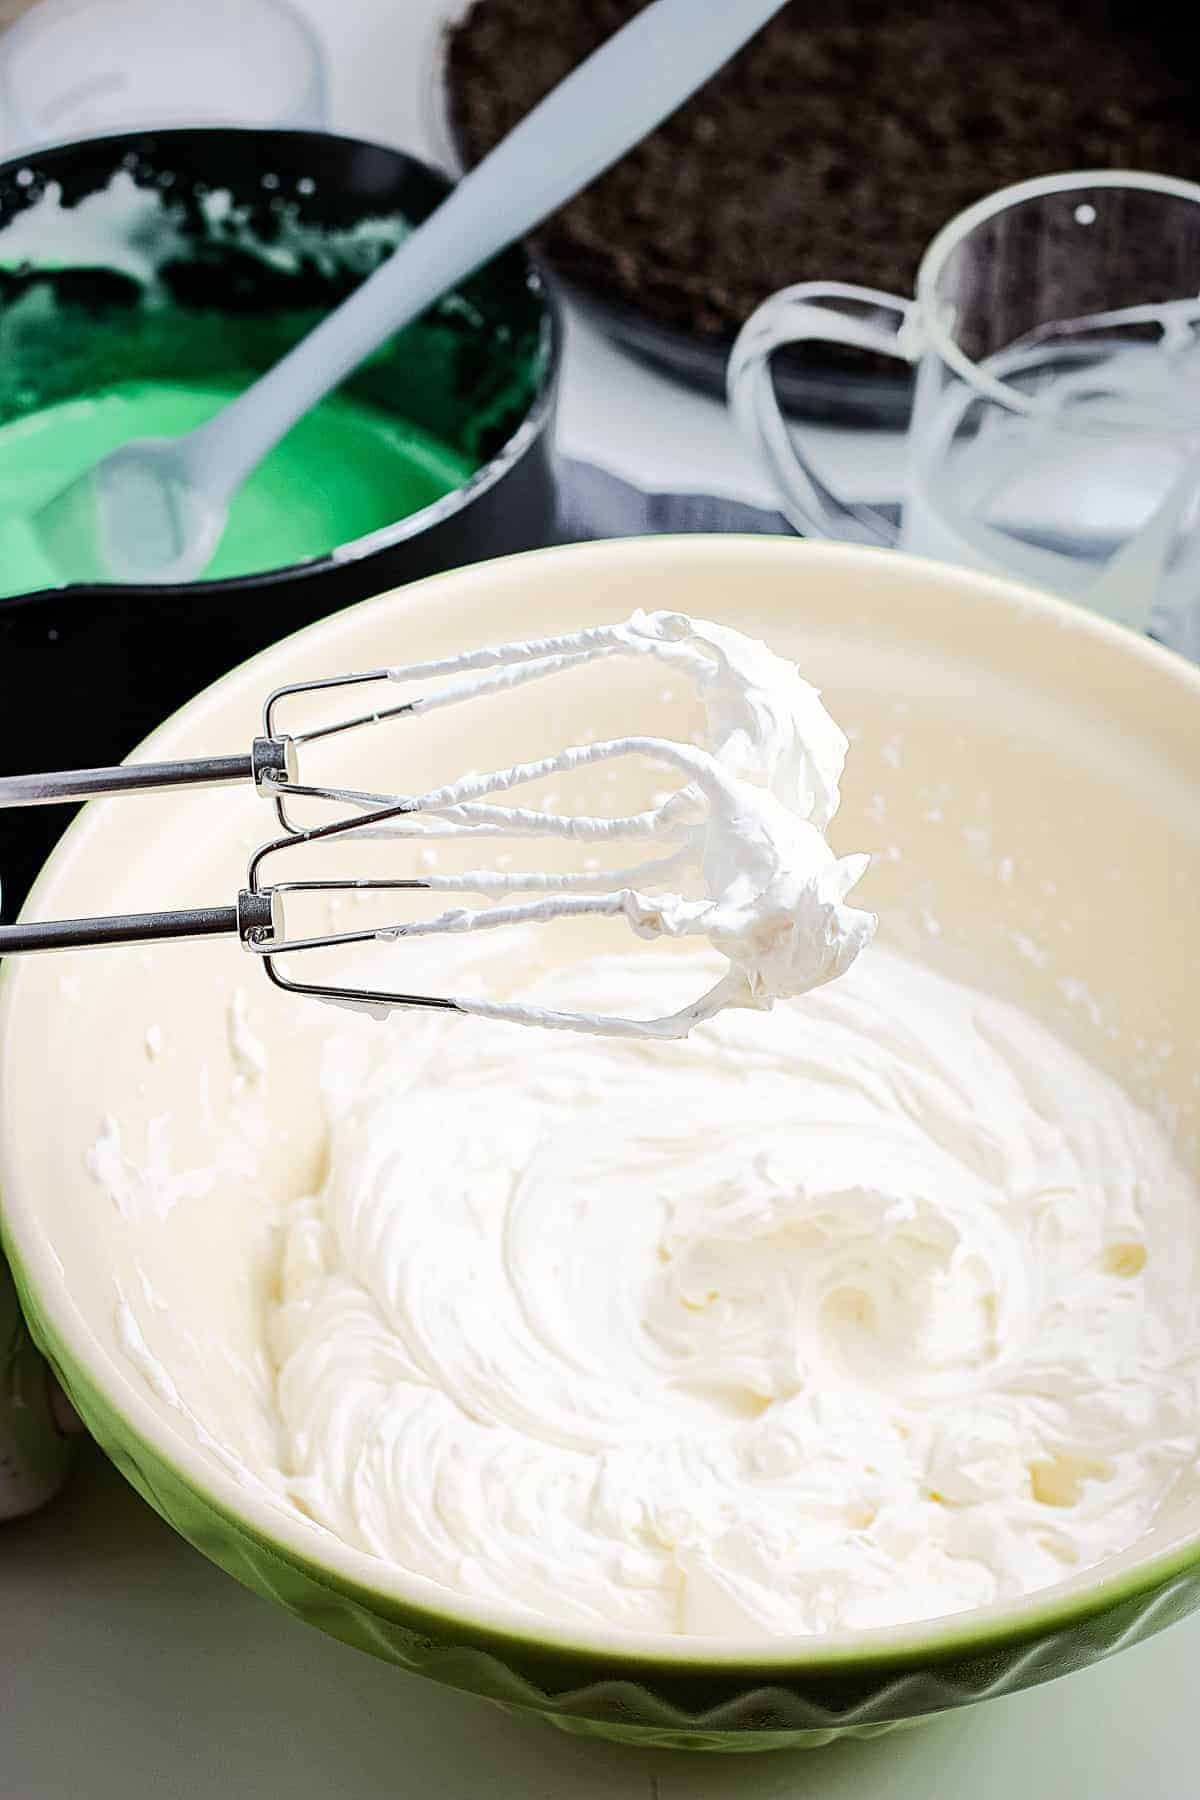 Bowl of whipped cream and hand mixer